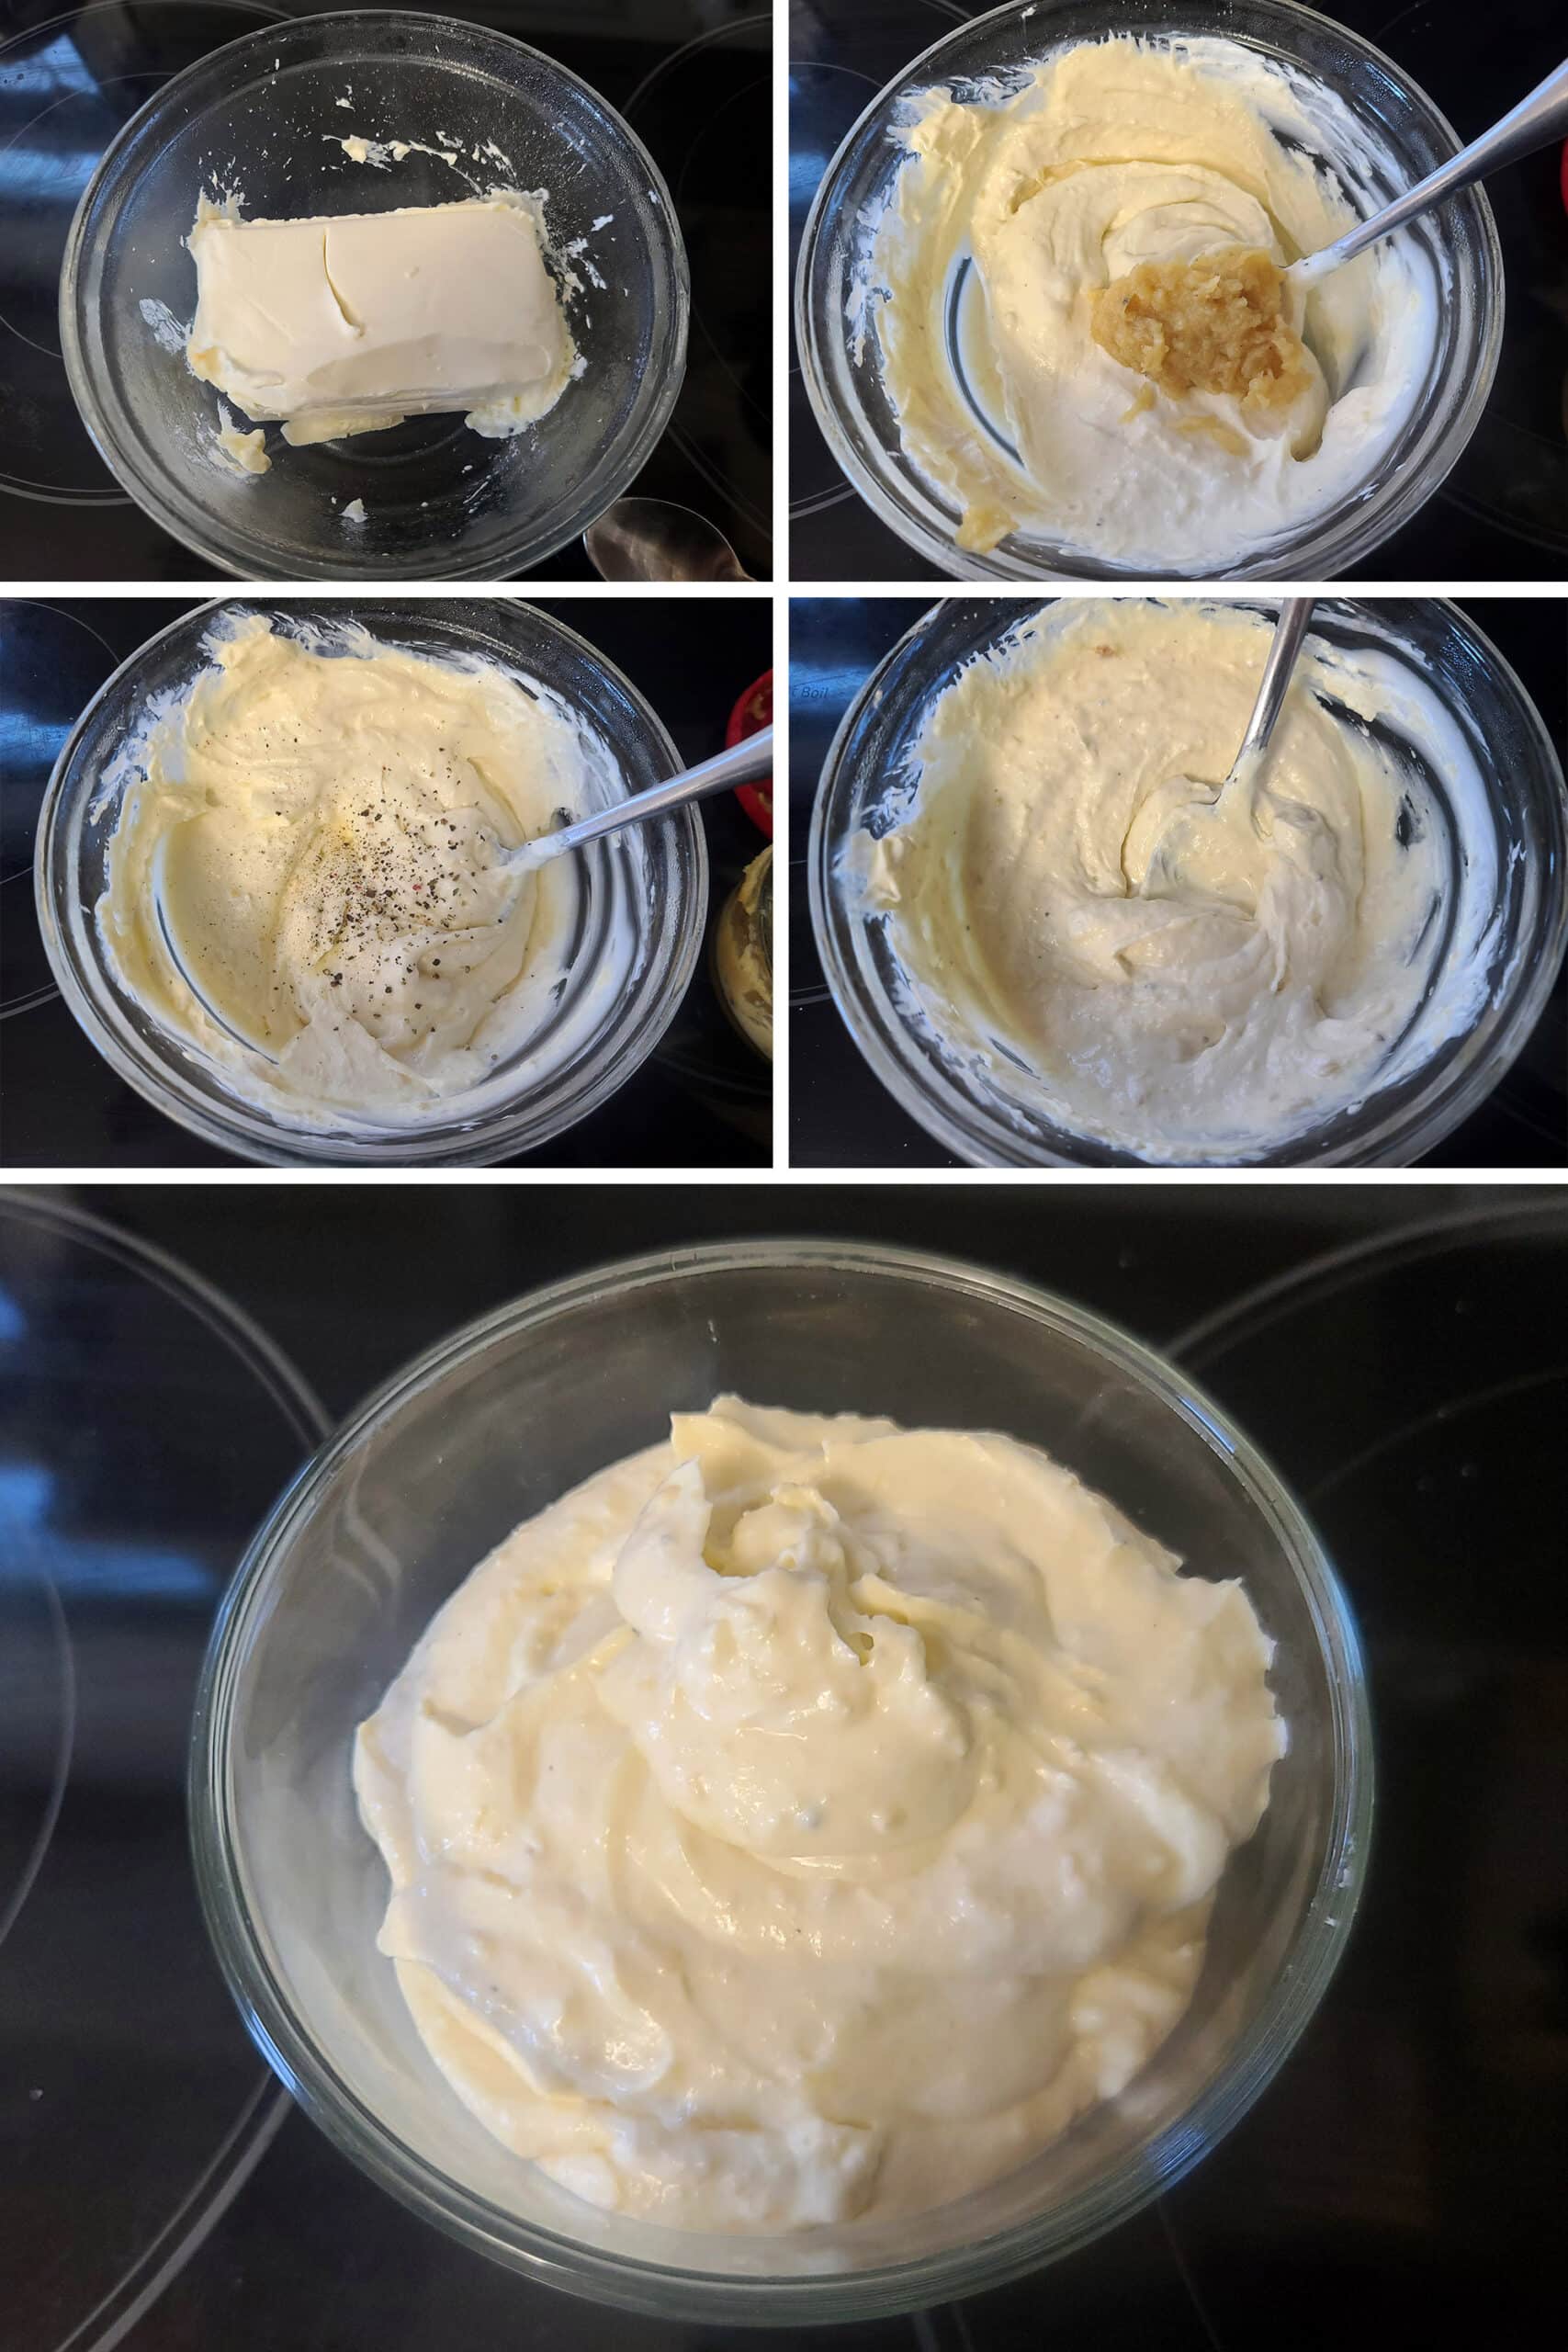 A 5 part image showing the roasted garlic cream cheese being mixed together.